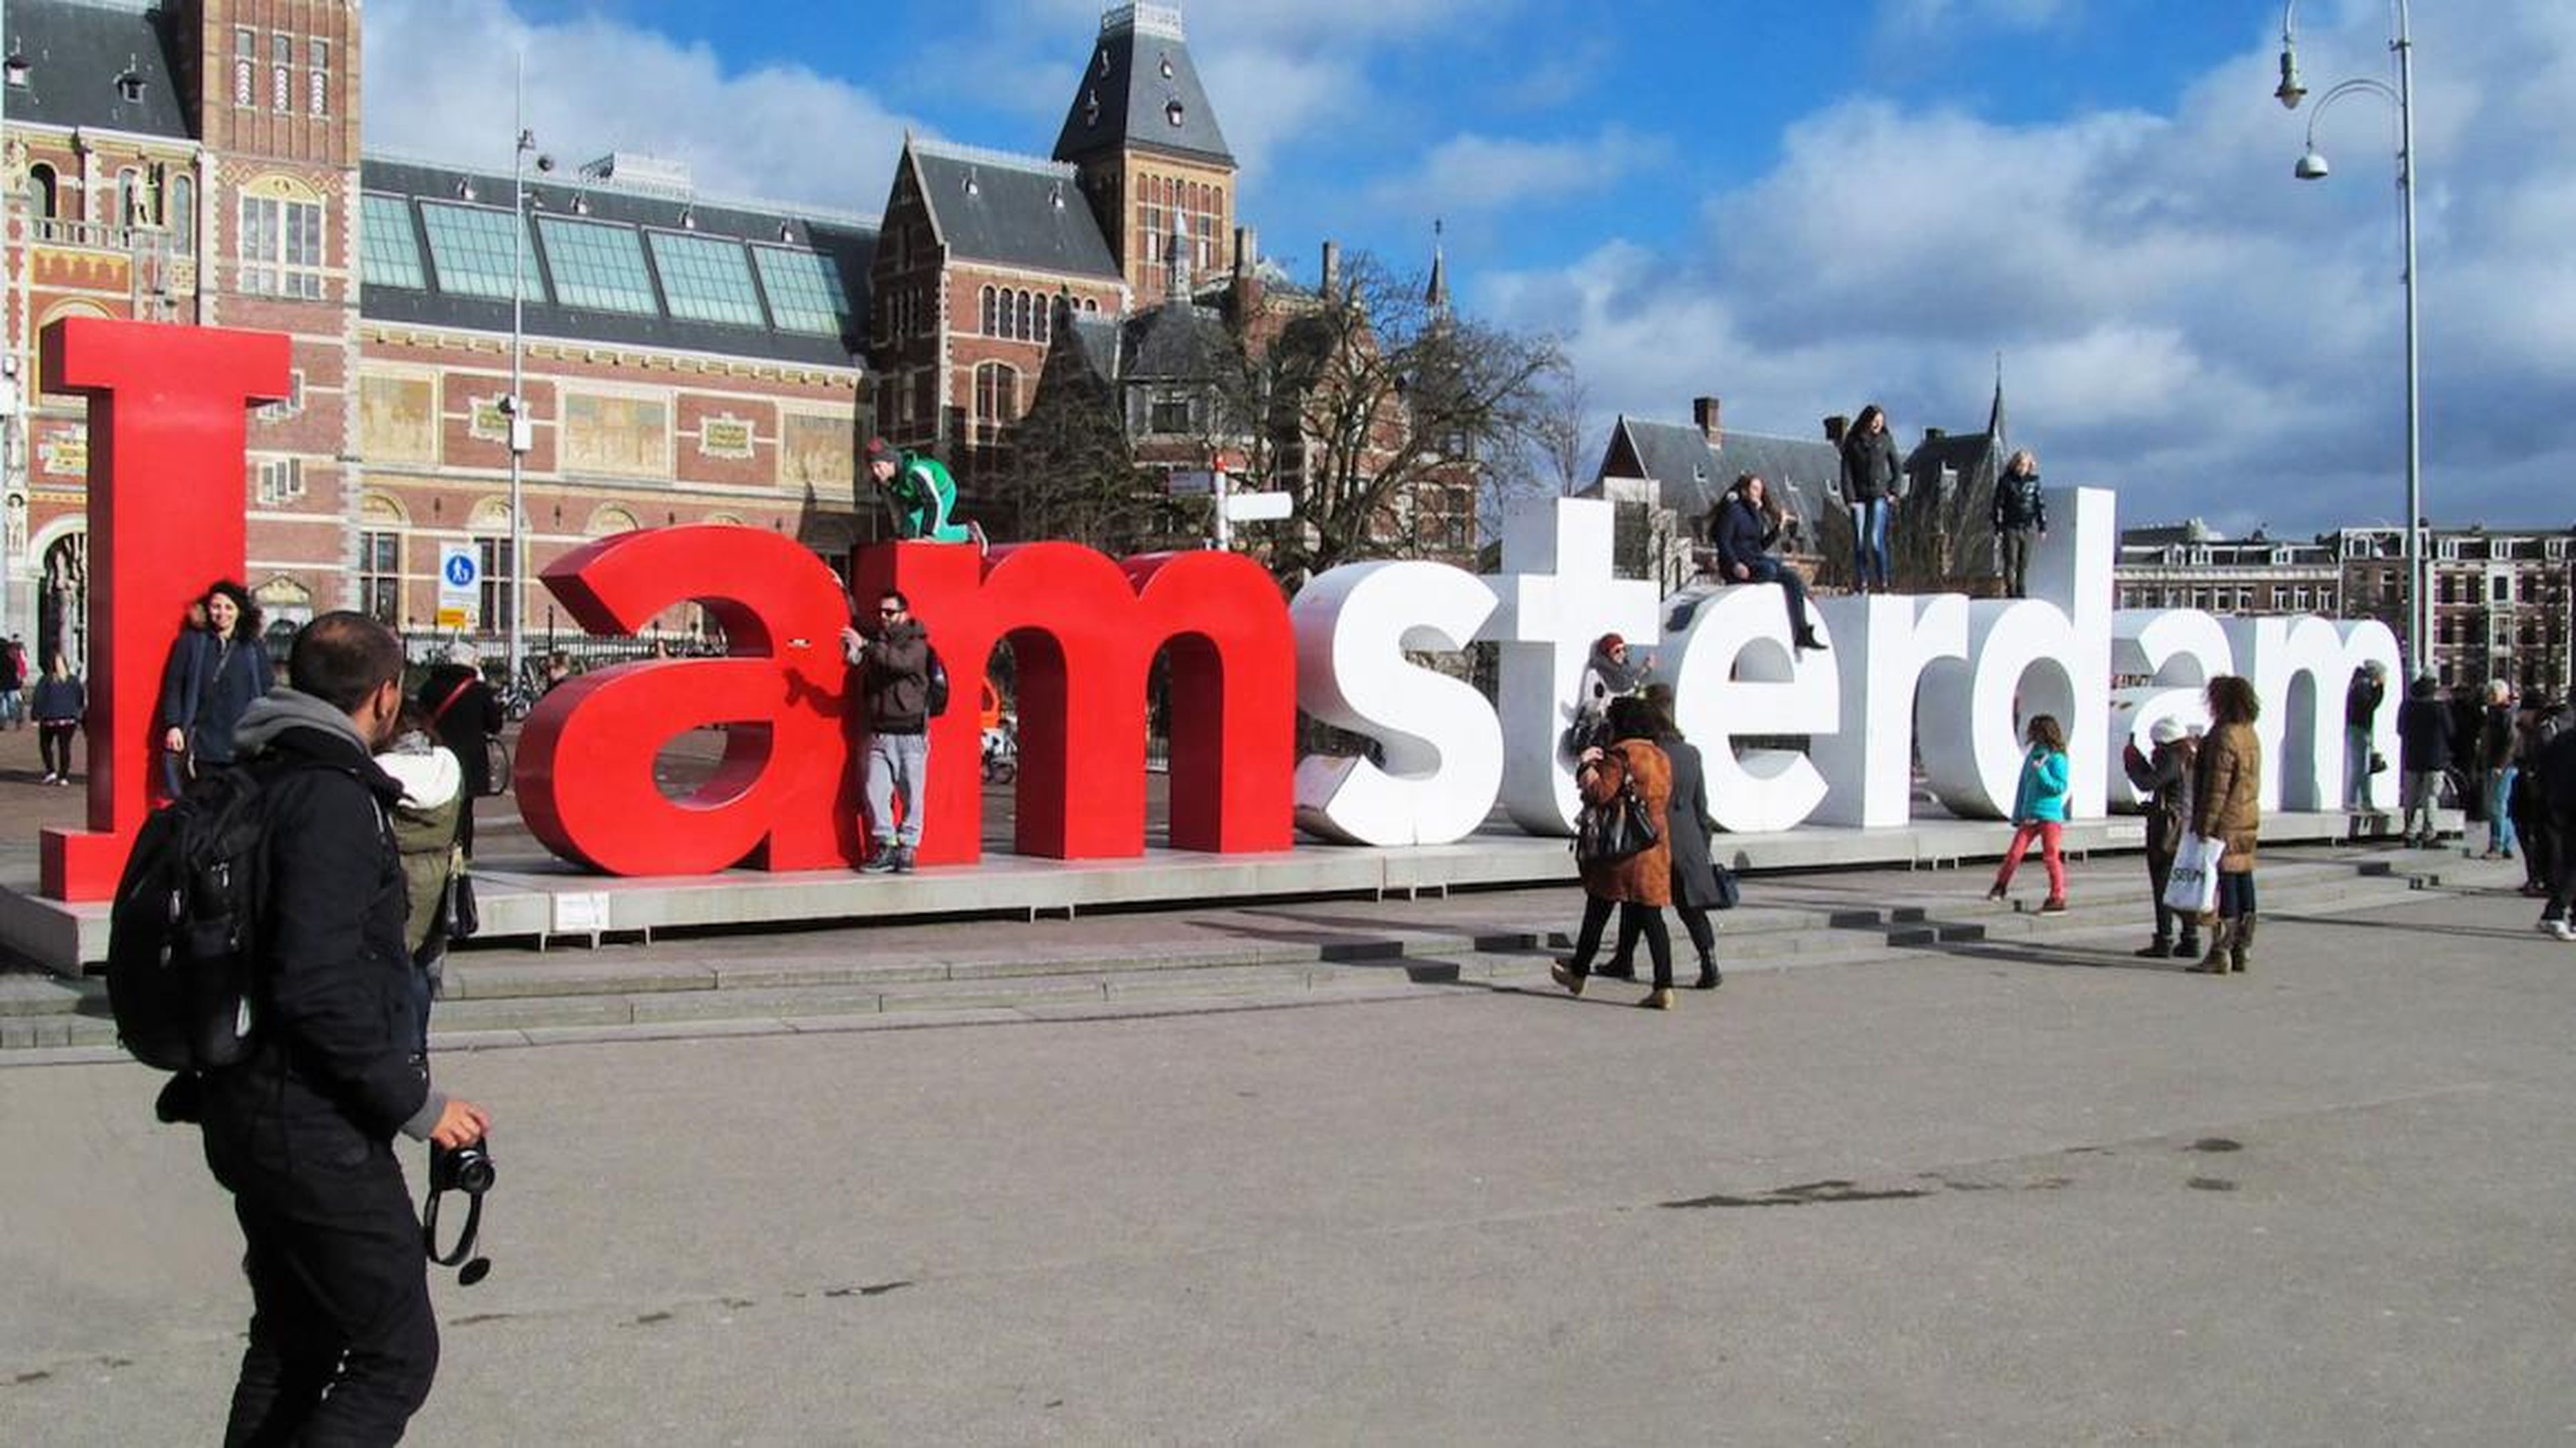 The iconic I amsterdam sign back in its glory days.